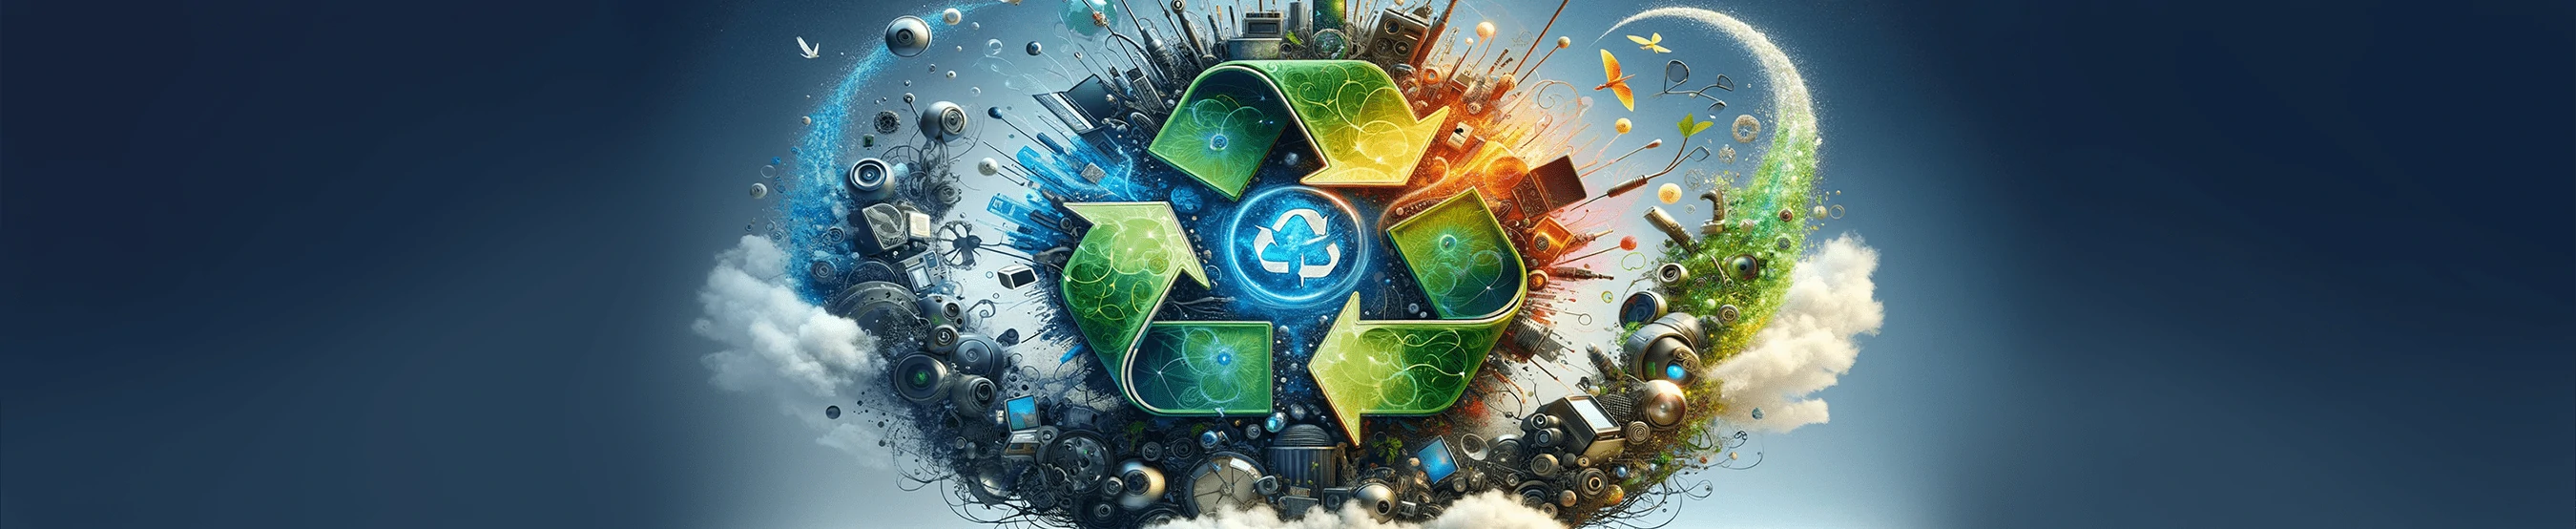 Electronics Recycling services